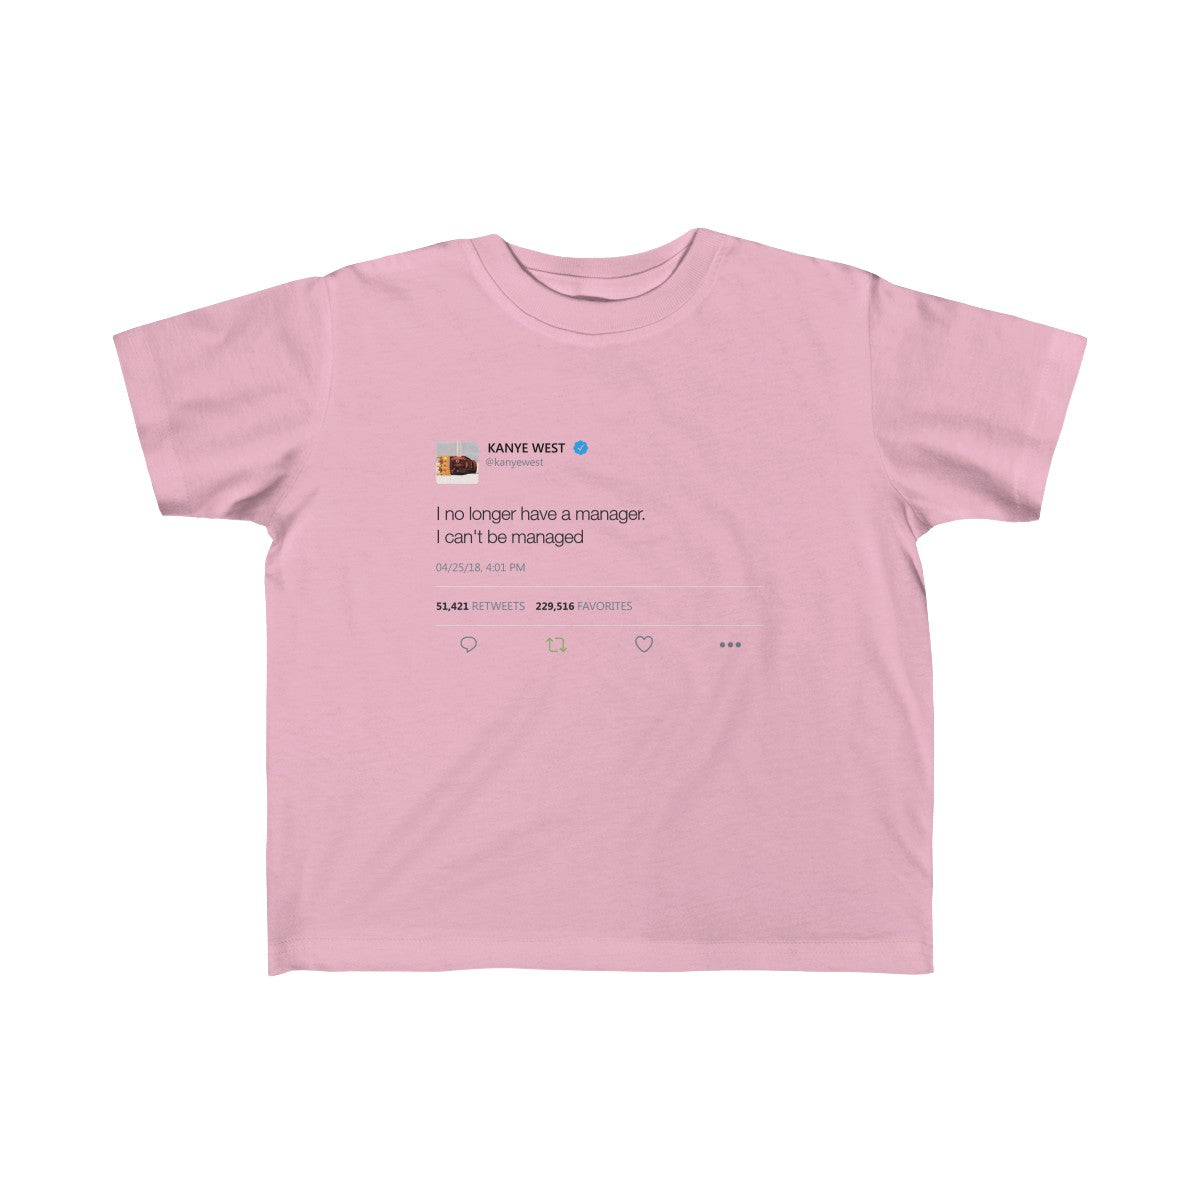 Kid's Fine Jersey Tee - I no longer Have a Manager, I can't be managed-Pink-5T-6T-Archethype